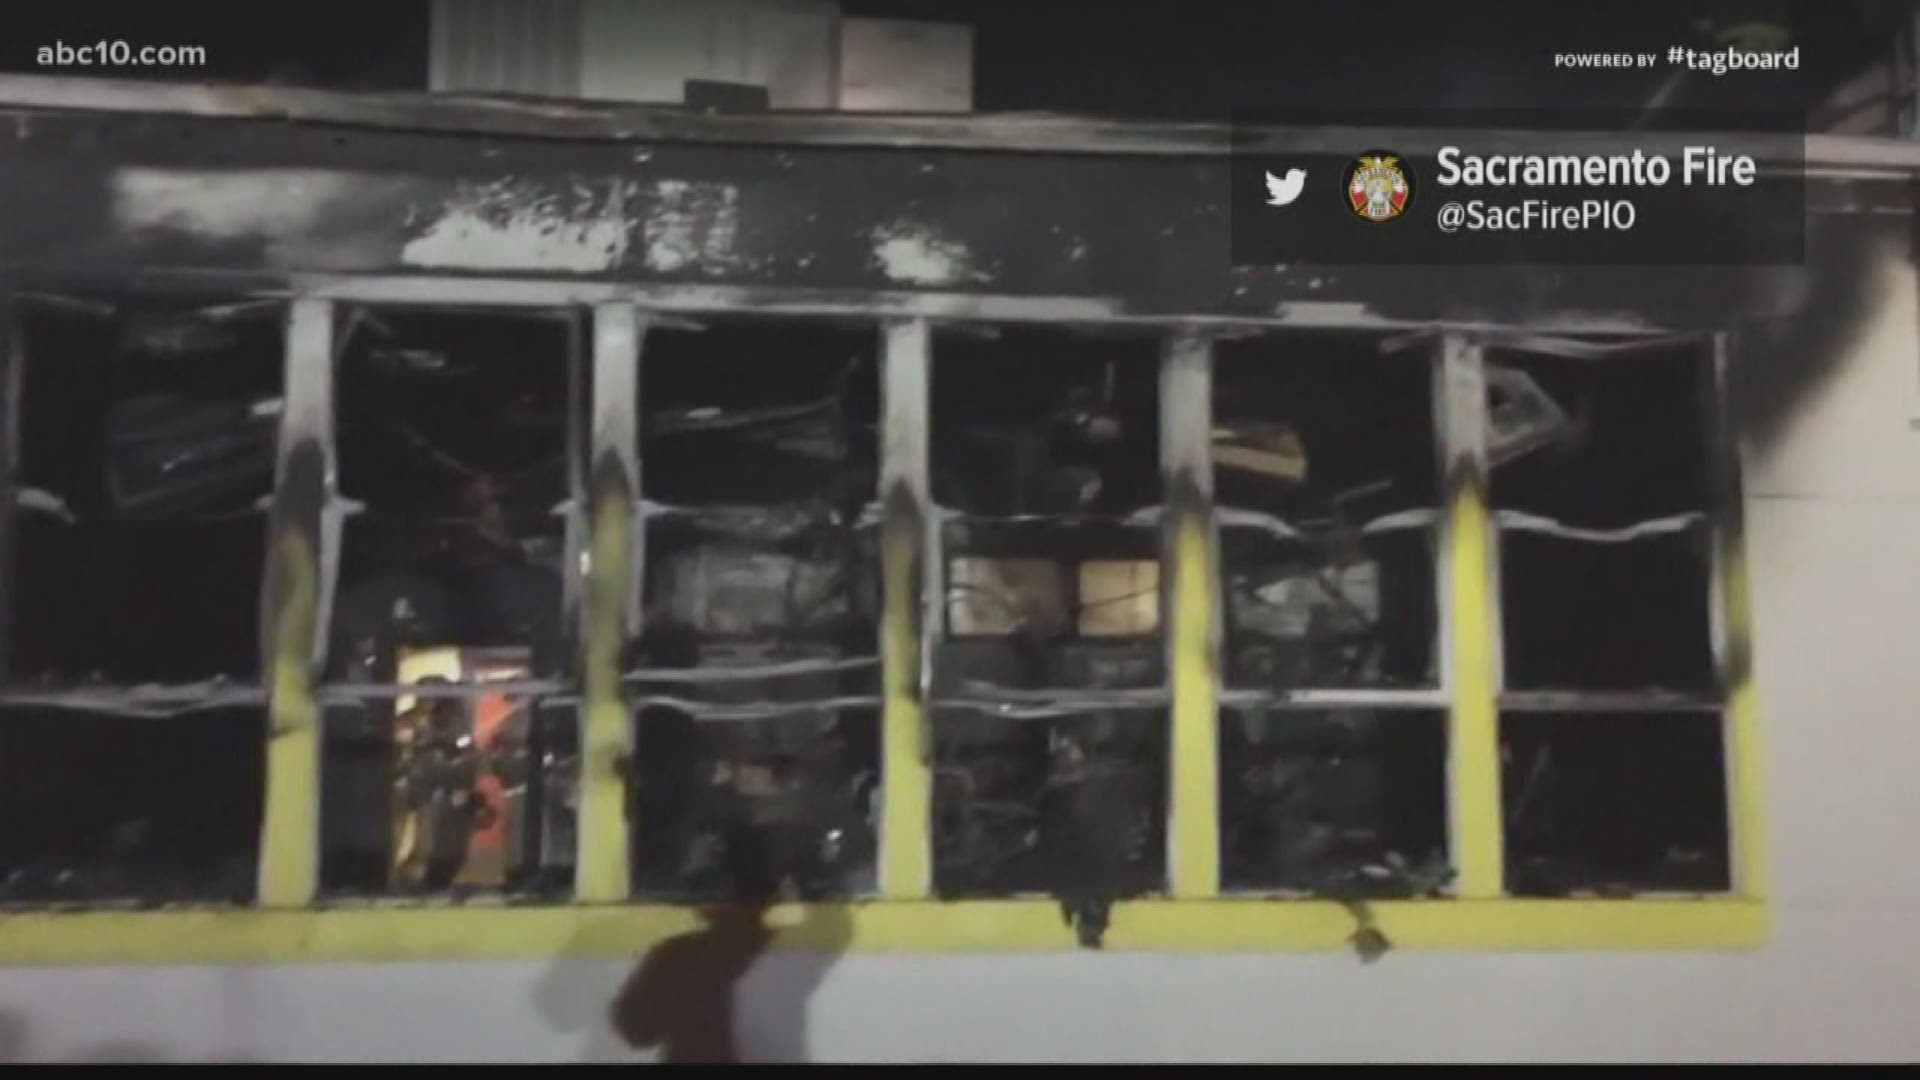 A fire burning Sunday night at in Del Paso Heights destroyed one classroom at Grant High School, according to the Sacramento Fire Department.